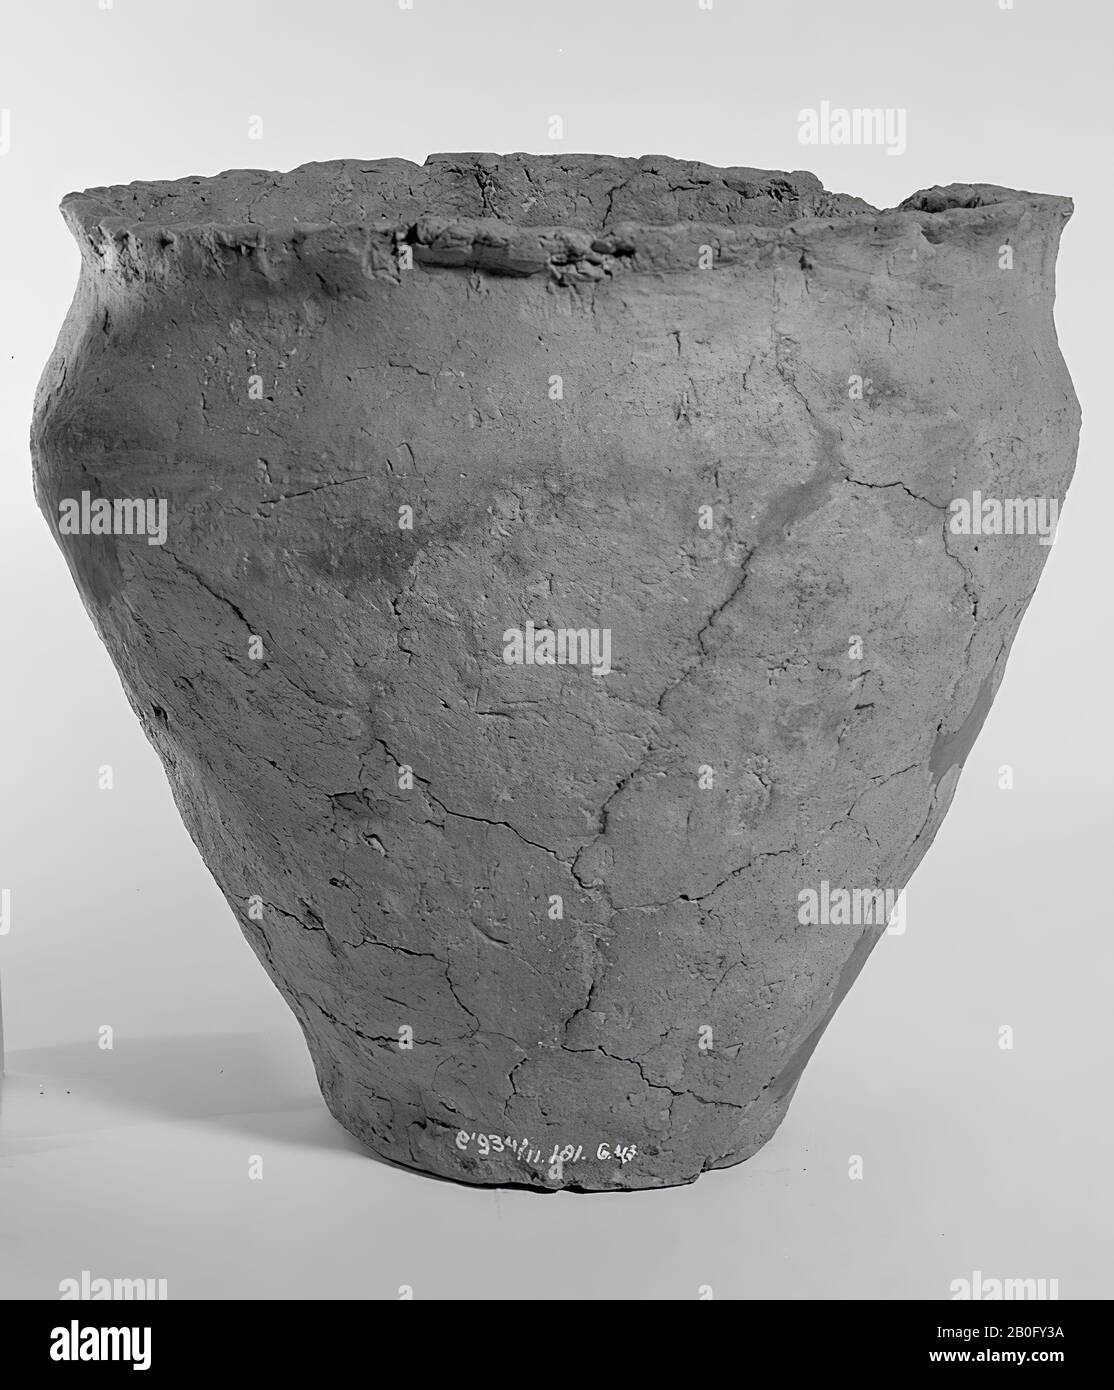 Germanic urn of earthenware with serrated edge, without decoration. Many glueing and some additions. Contains cremated residues, urn, earthenware, h: 21.8 cm, diam: 23.6 cm, prehistory -800 Stock Photo